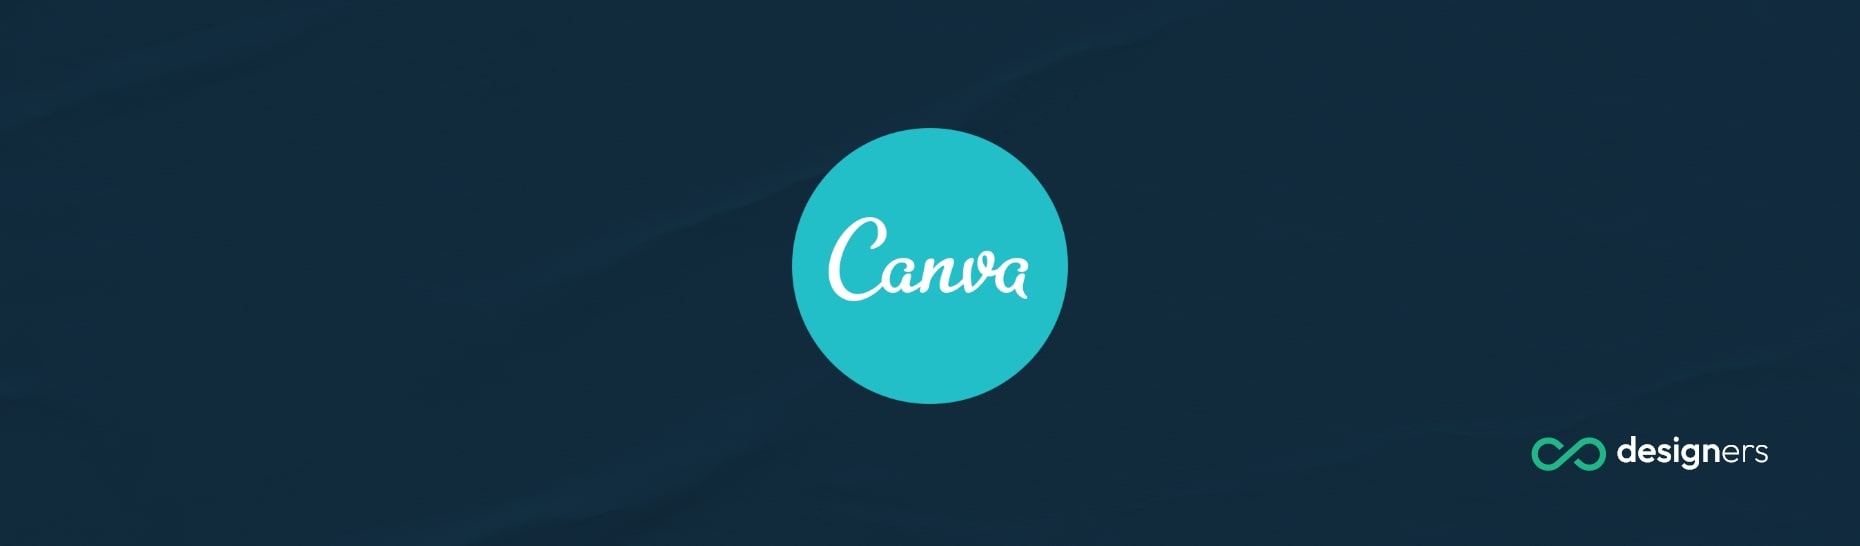 Is Canva Open Source?